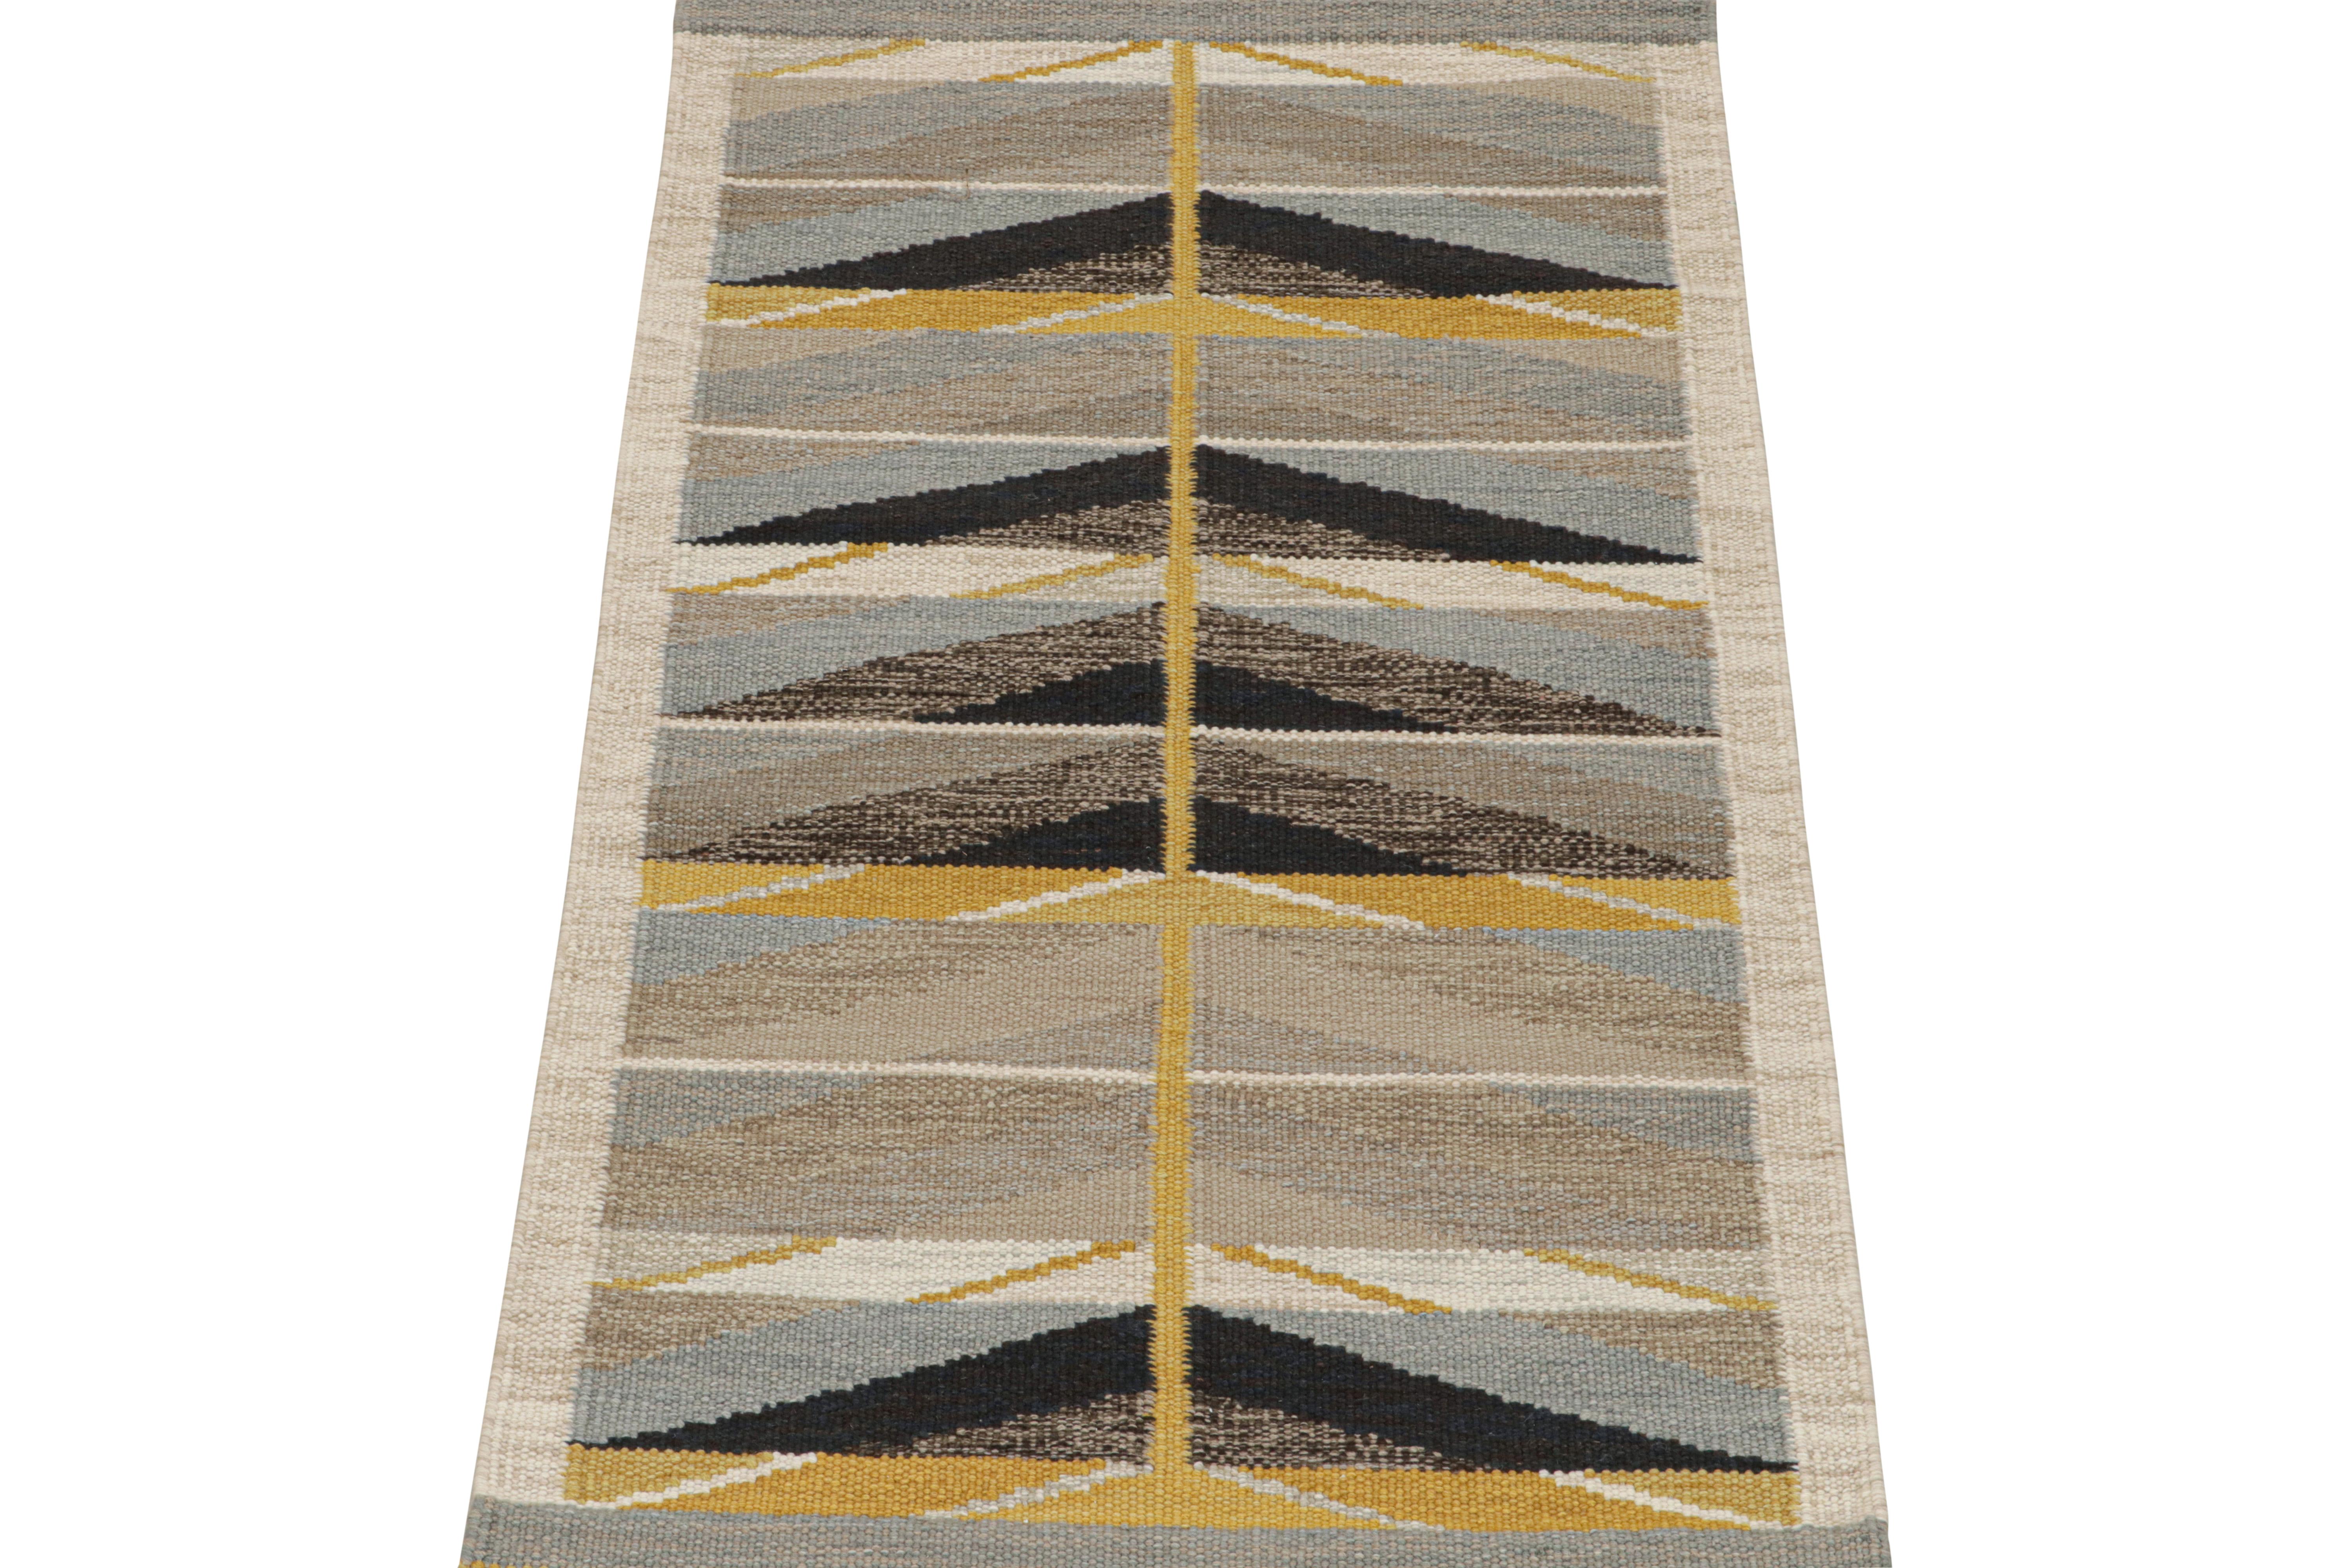 This 3x6 flat weave runner is a bold new addition to the Scandinavian Collection by Rug & Kilim. Handwoven in wool and natural yarns, its design reflects a contemporary take on mid-century Rollakans and Swedish Deco style.

On the Design:

This